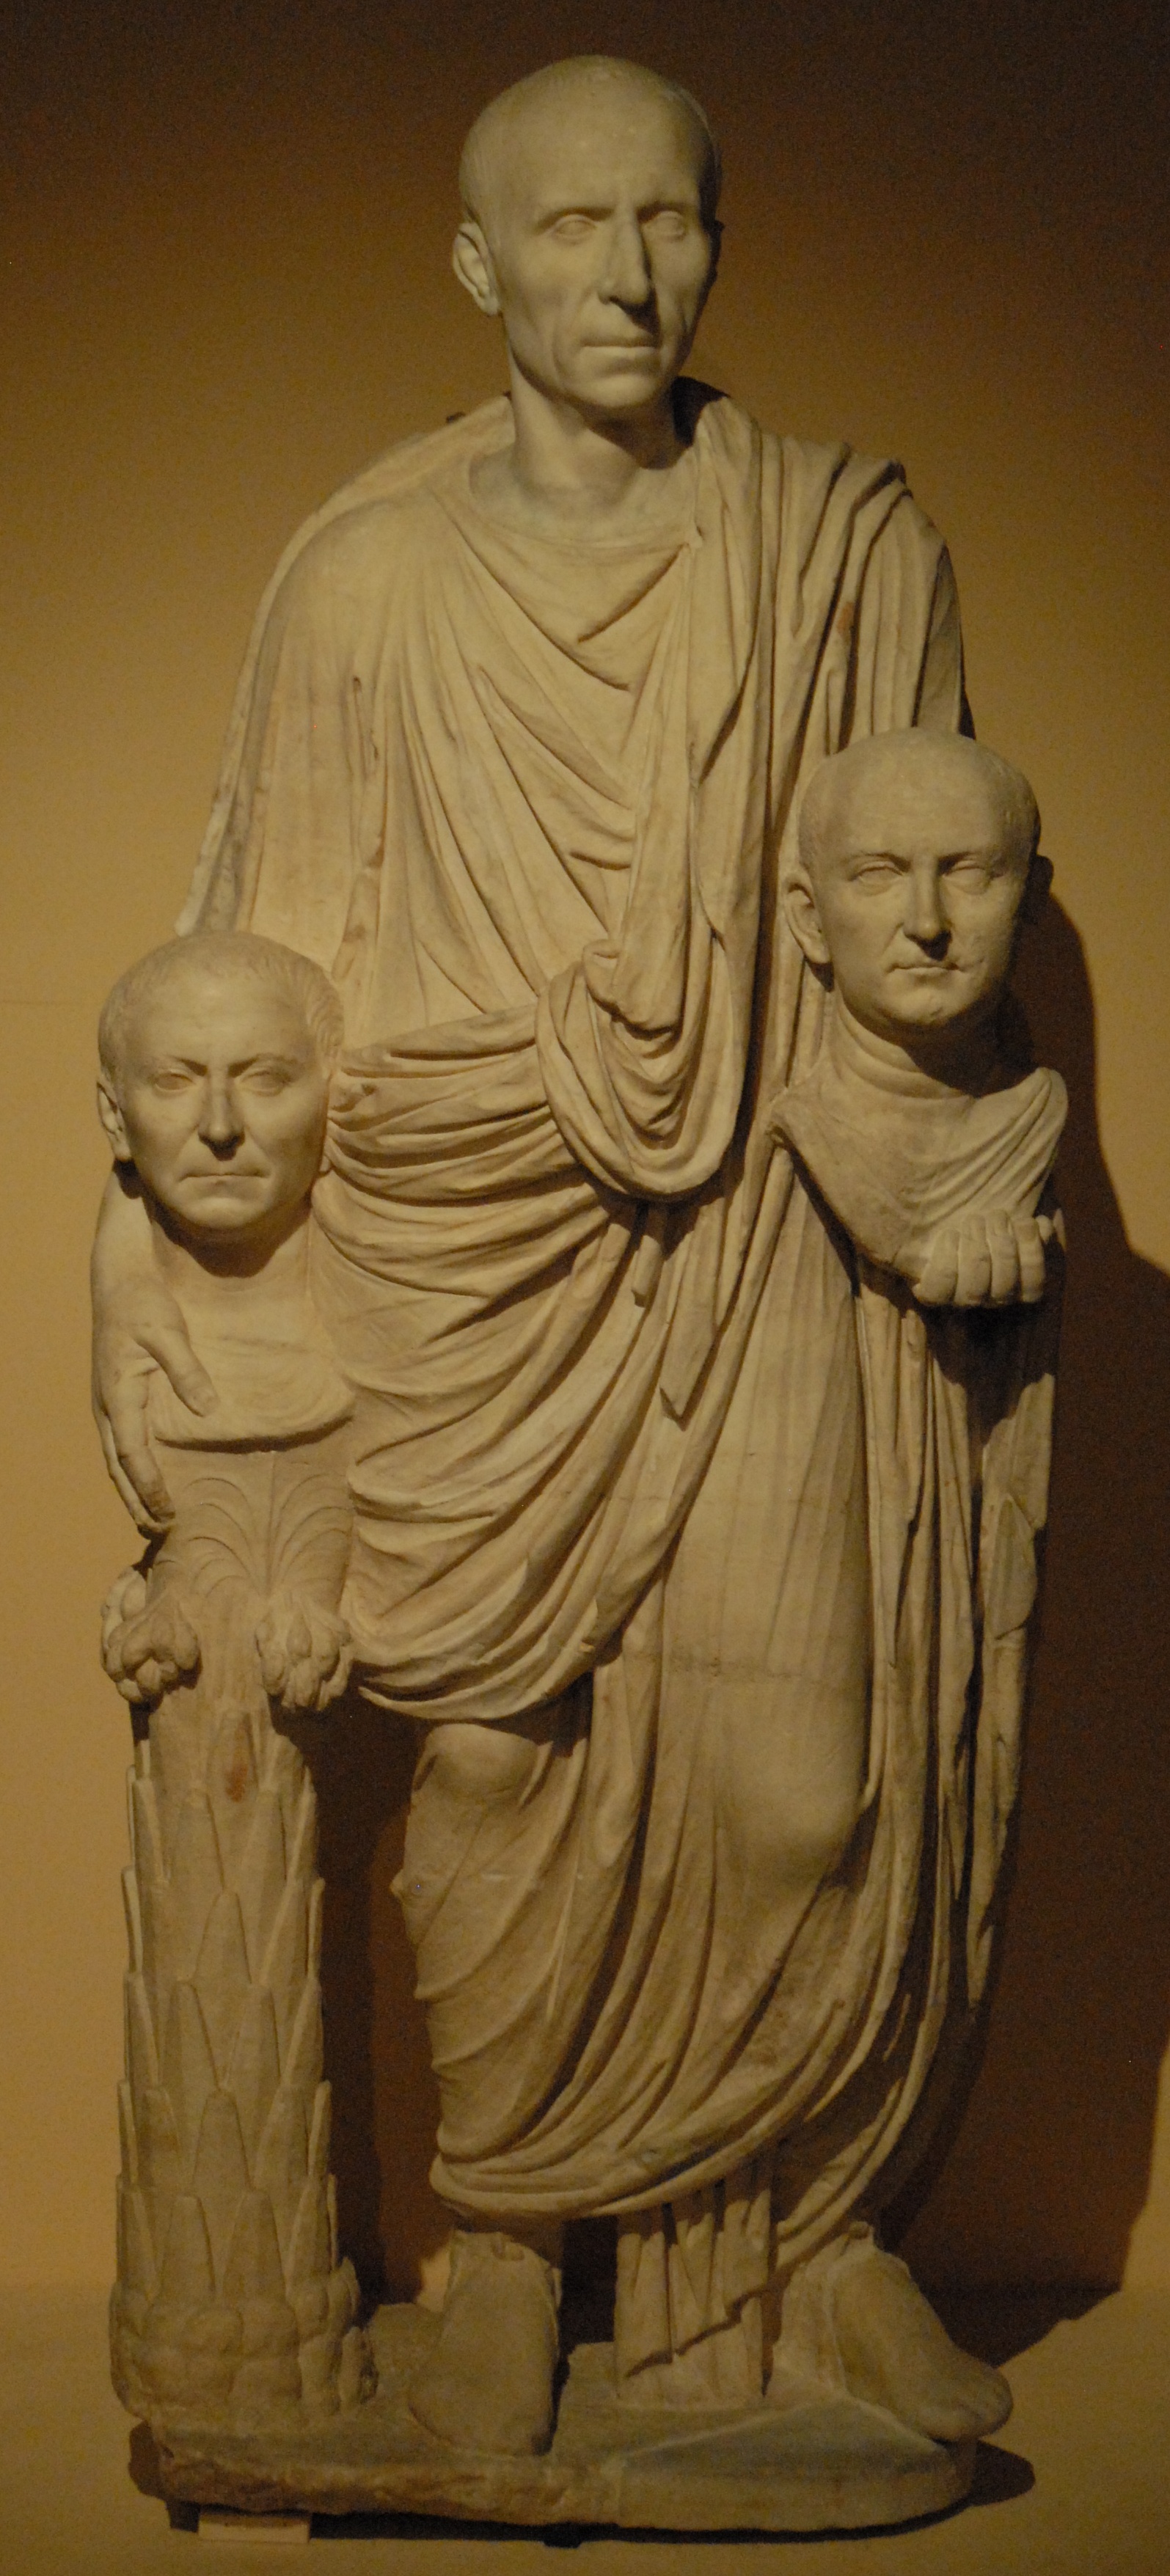 marble statue of senator with ancestor-busts, last decade 1c BC